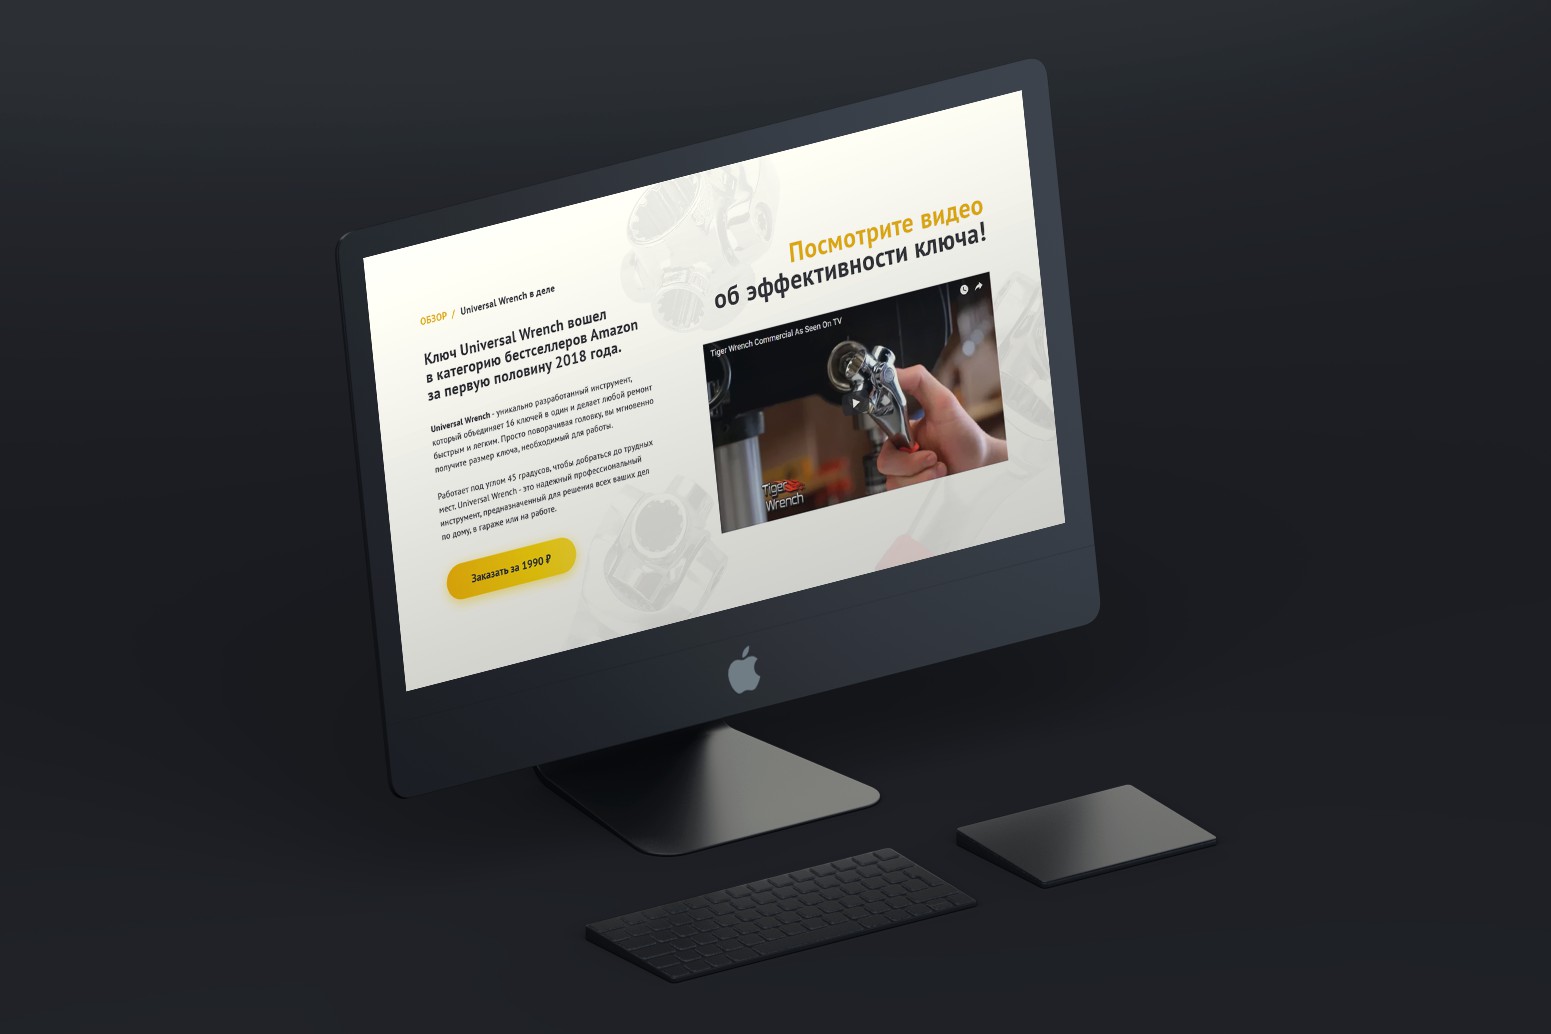 Landing Page "Universal Wrench"